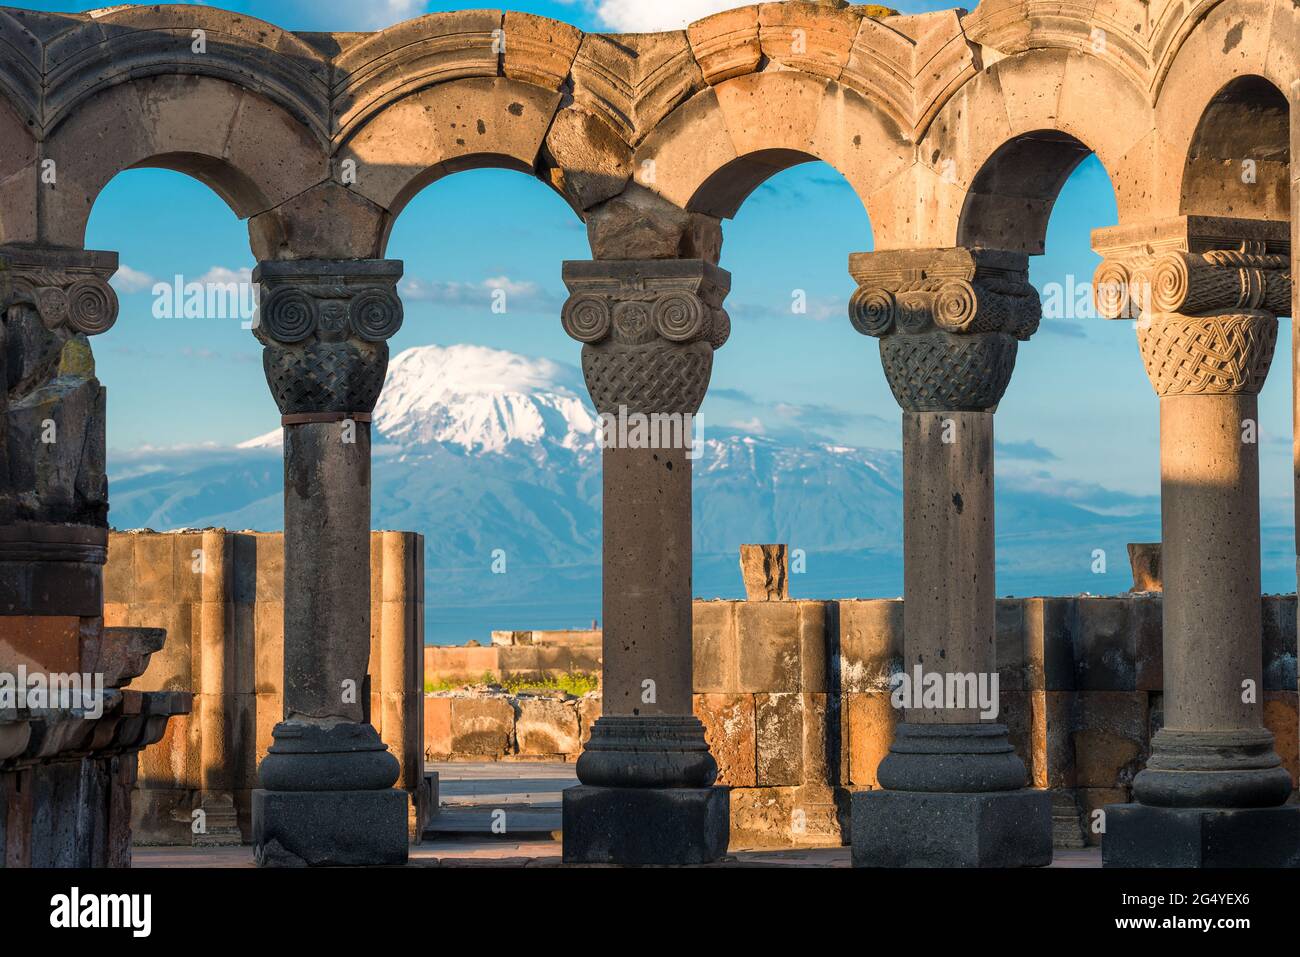 Columns of the ancient Zvartnots temple on the background of high snow-capped Mount Ararat, a tourist attraction Stock Photo